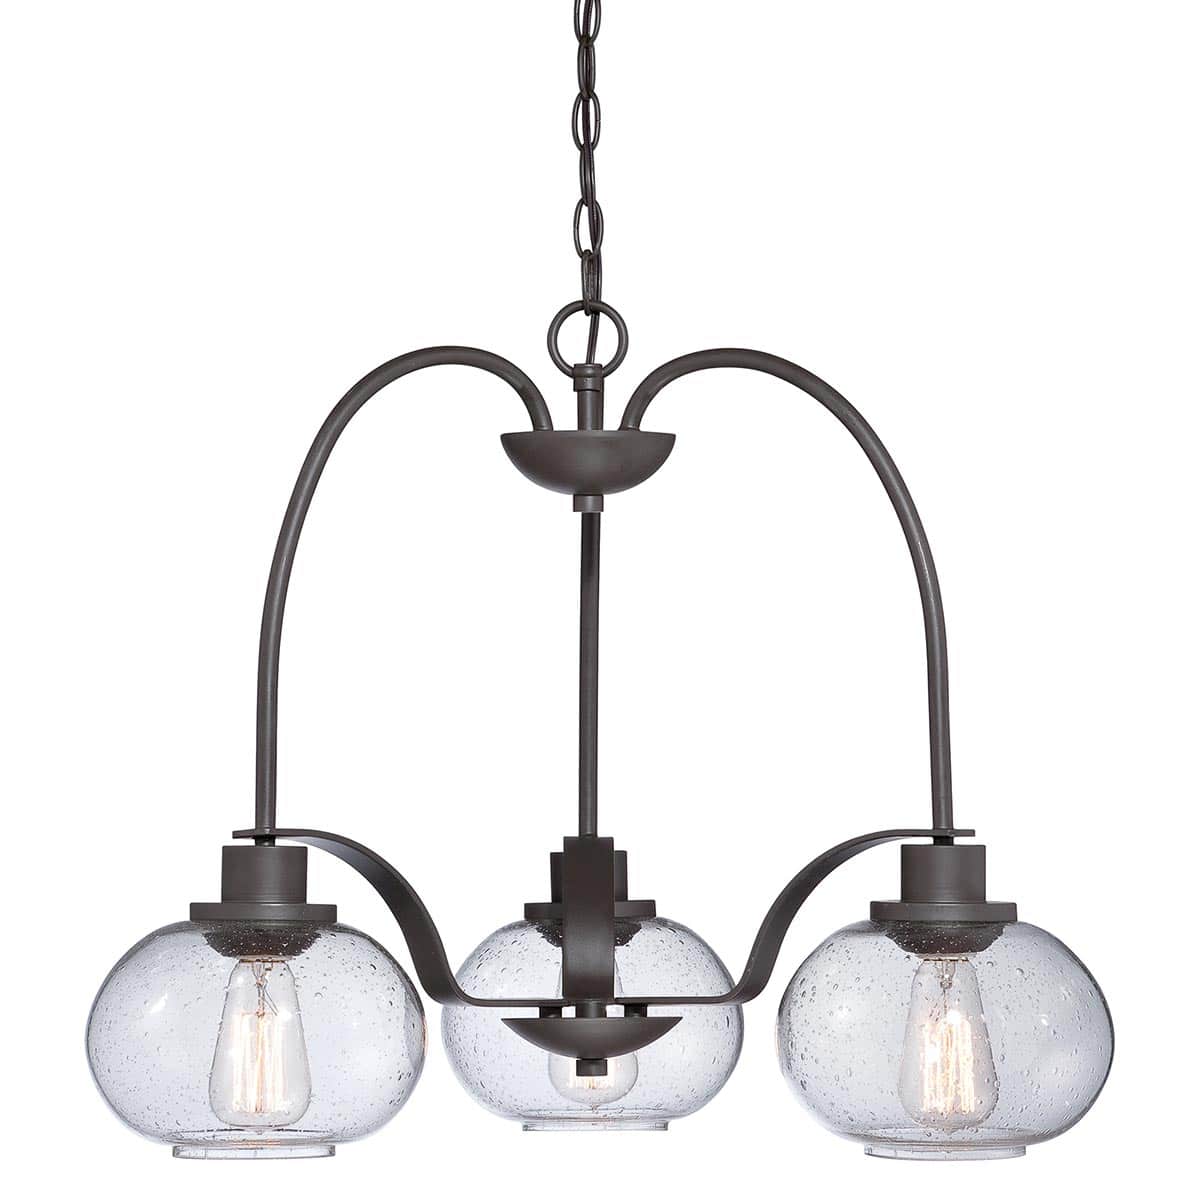 Quoizel Trilogy 3 Light Chandelier Old Bronze Clear Seeded Glass Shades